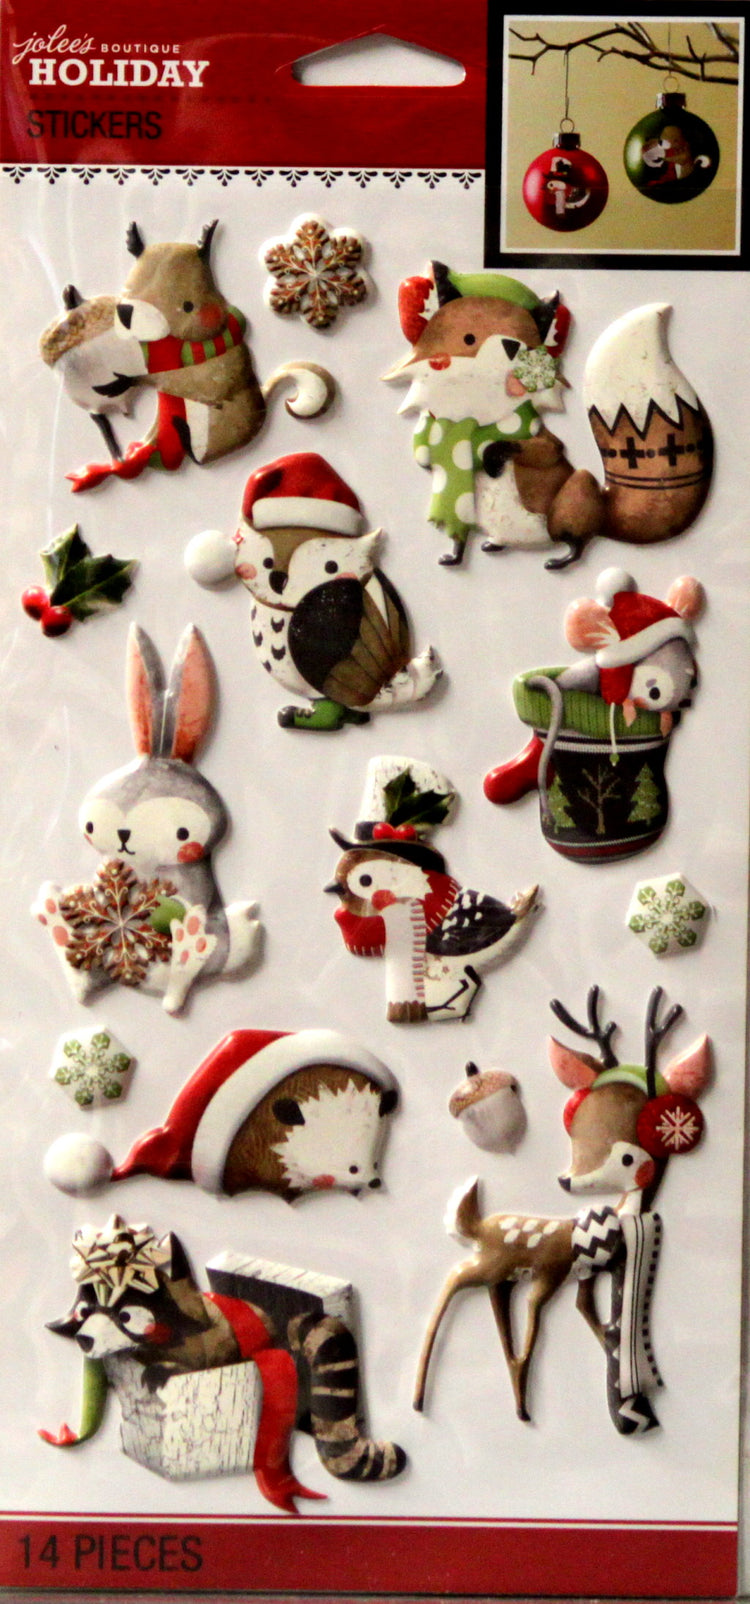 Jolee's Boutique Holiday Animals Puffy Dimensional Stickers Embellishments